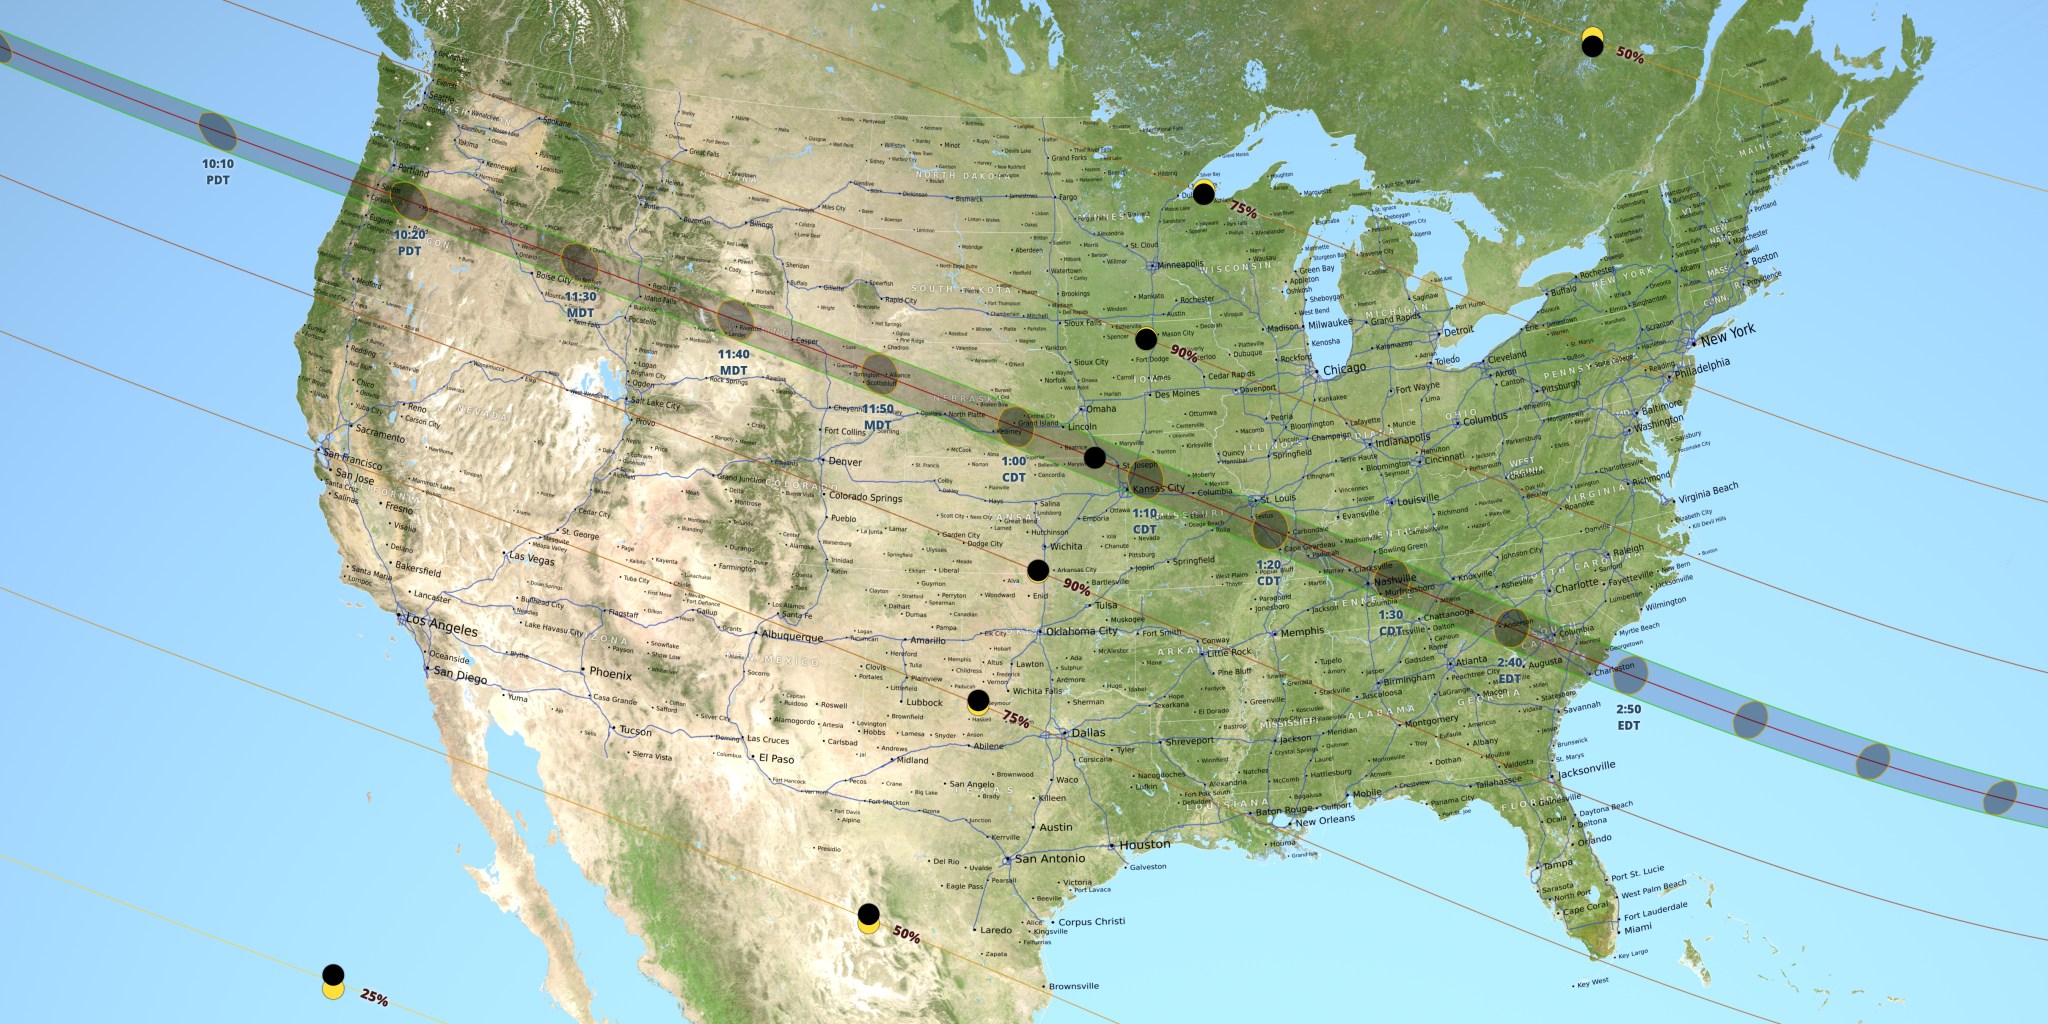 The total solar eclipse of Aug. 21, 2017, stretches across the U.S. from coast to coast.